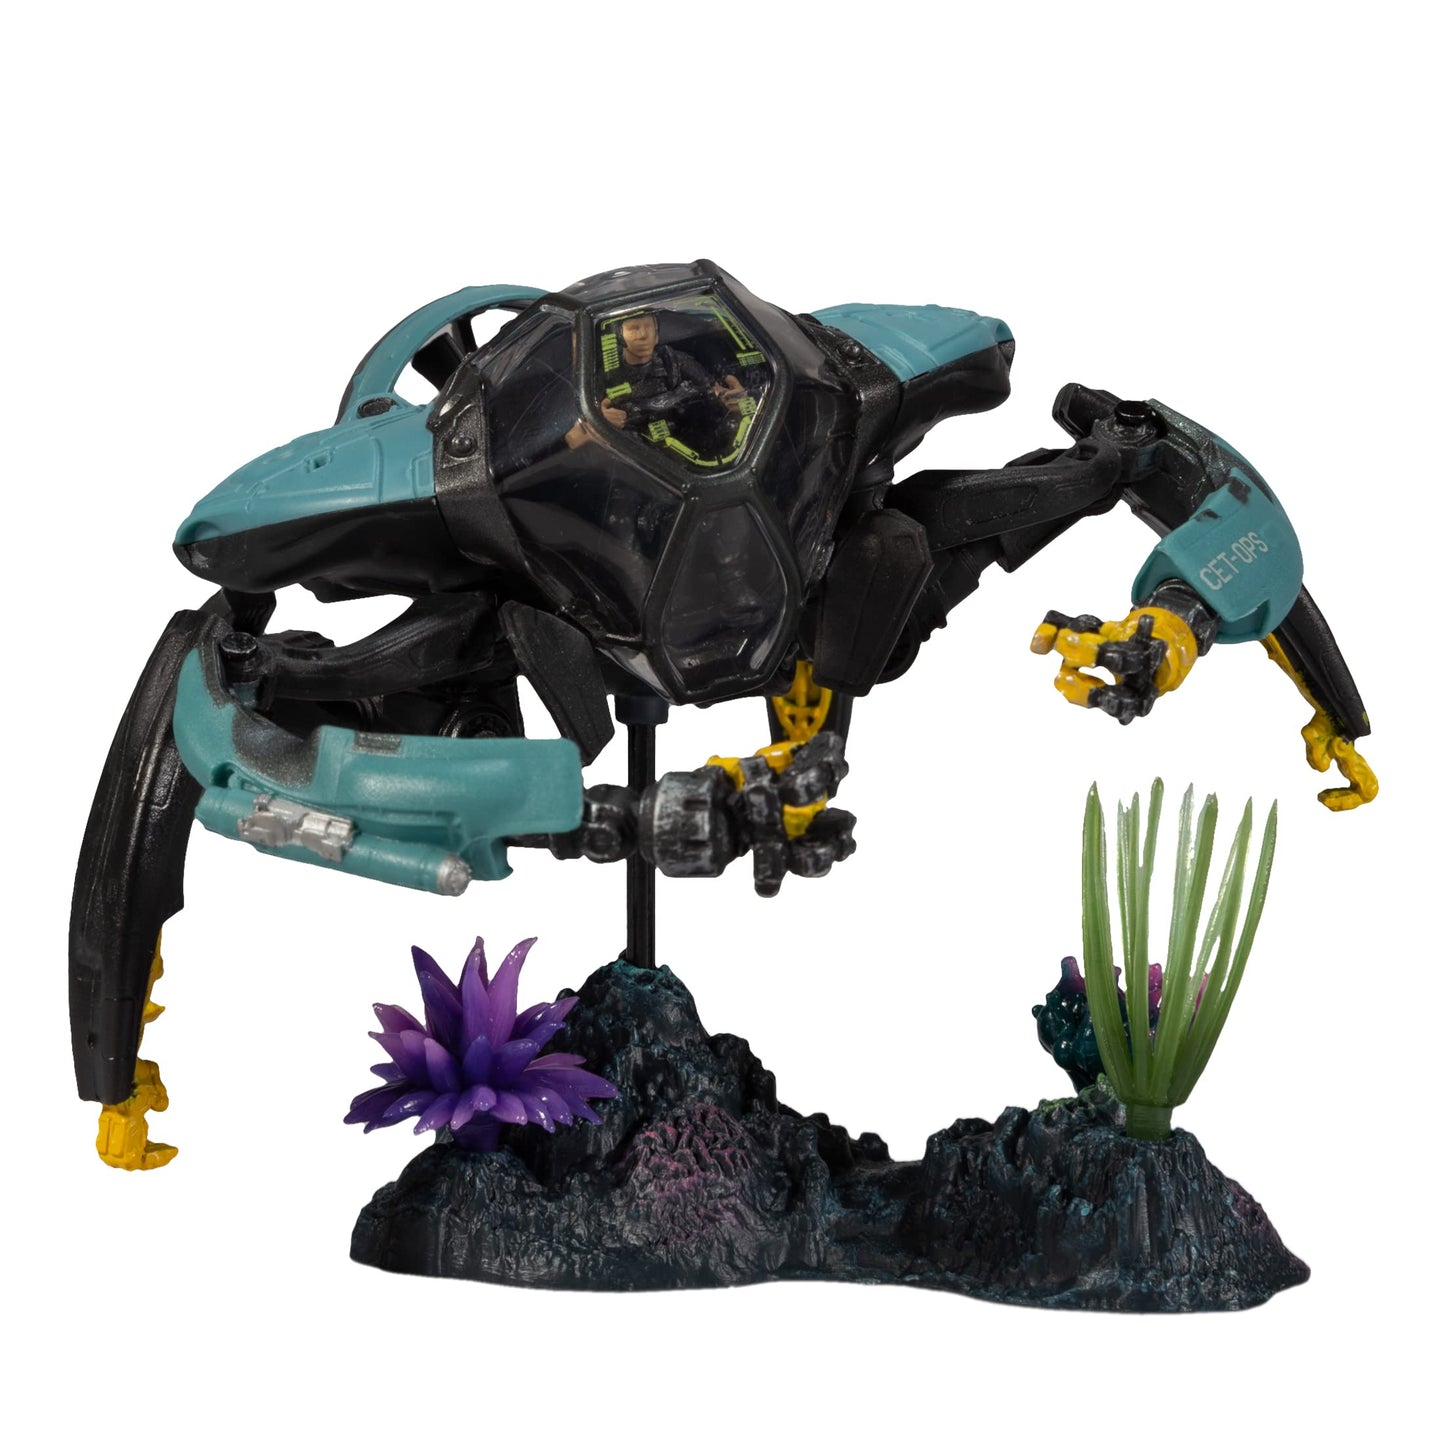 Avatar The Way of Water World of Pandora CET-OPS Crabsuit Action Figure